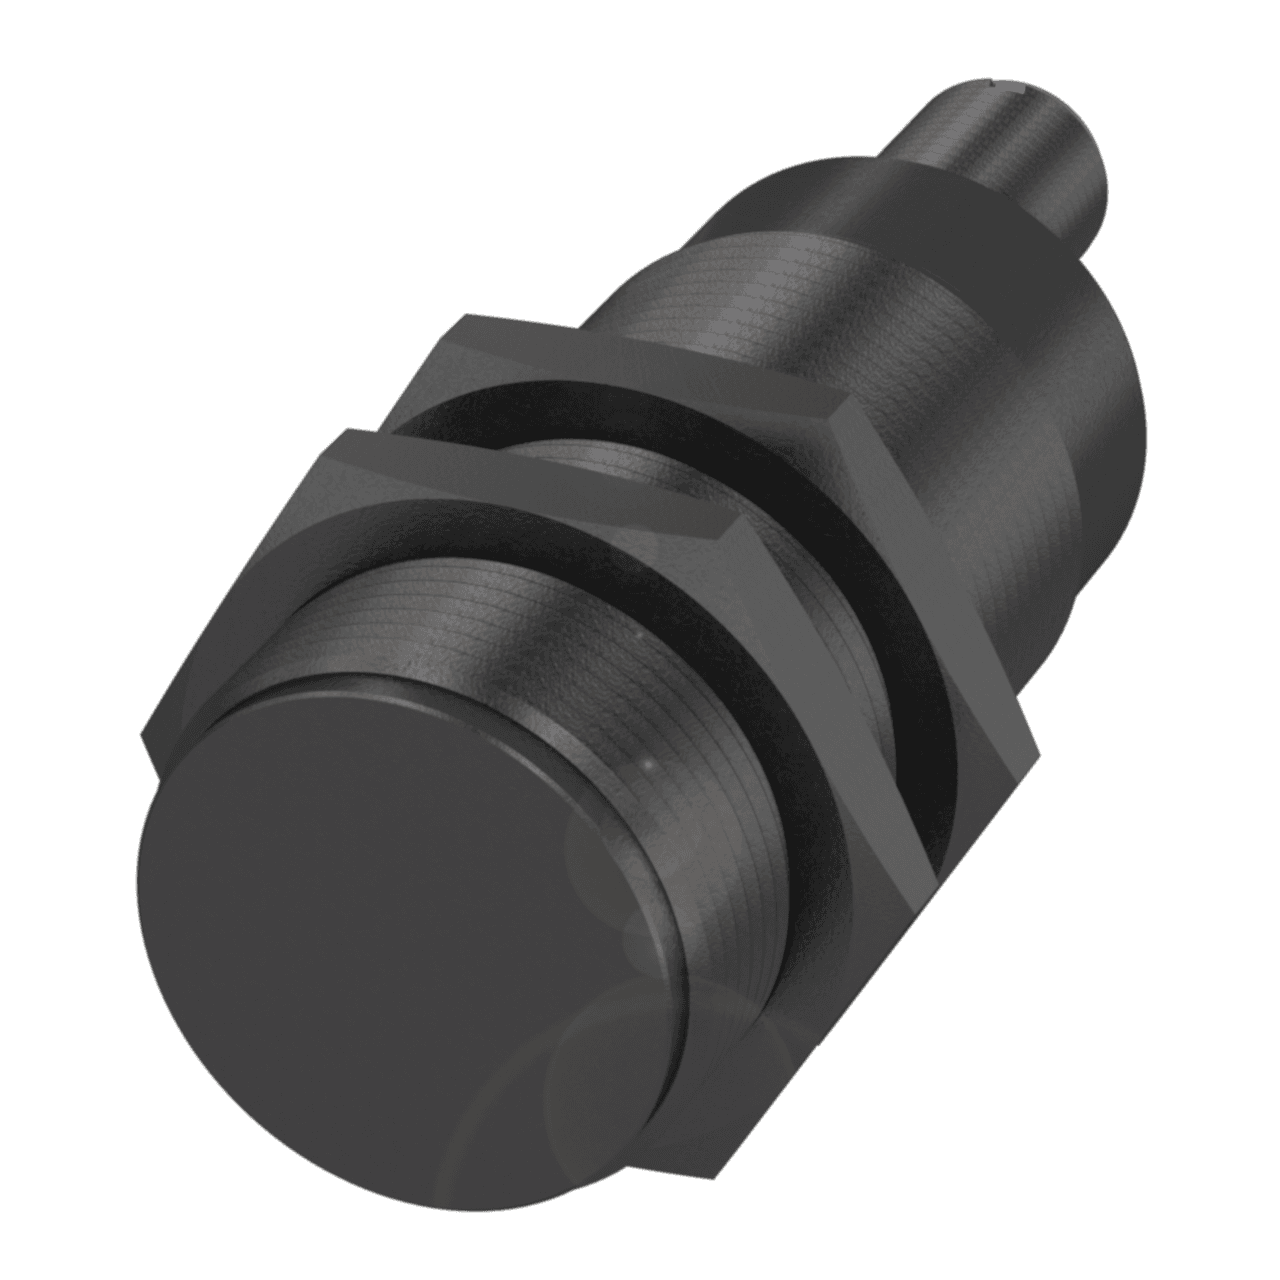 Balluff BCS00NA Capacitive sensors for object detection, Dimension: Ø 30 x 79 mm, Series: M30, Thread (A): M30x1.5, Installation: for flush mounting, Connection: Connector, M12x1-Male, 3-pin, Switching output: PNP Normally open (NO), Switching frequency: 100 Hz